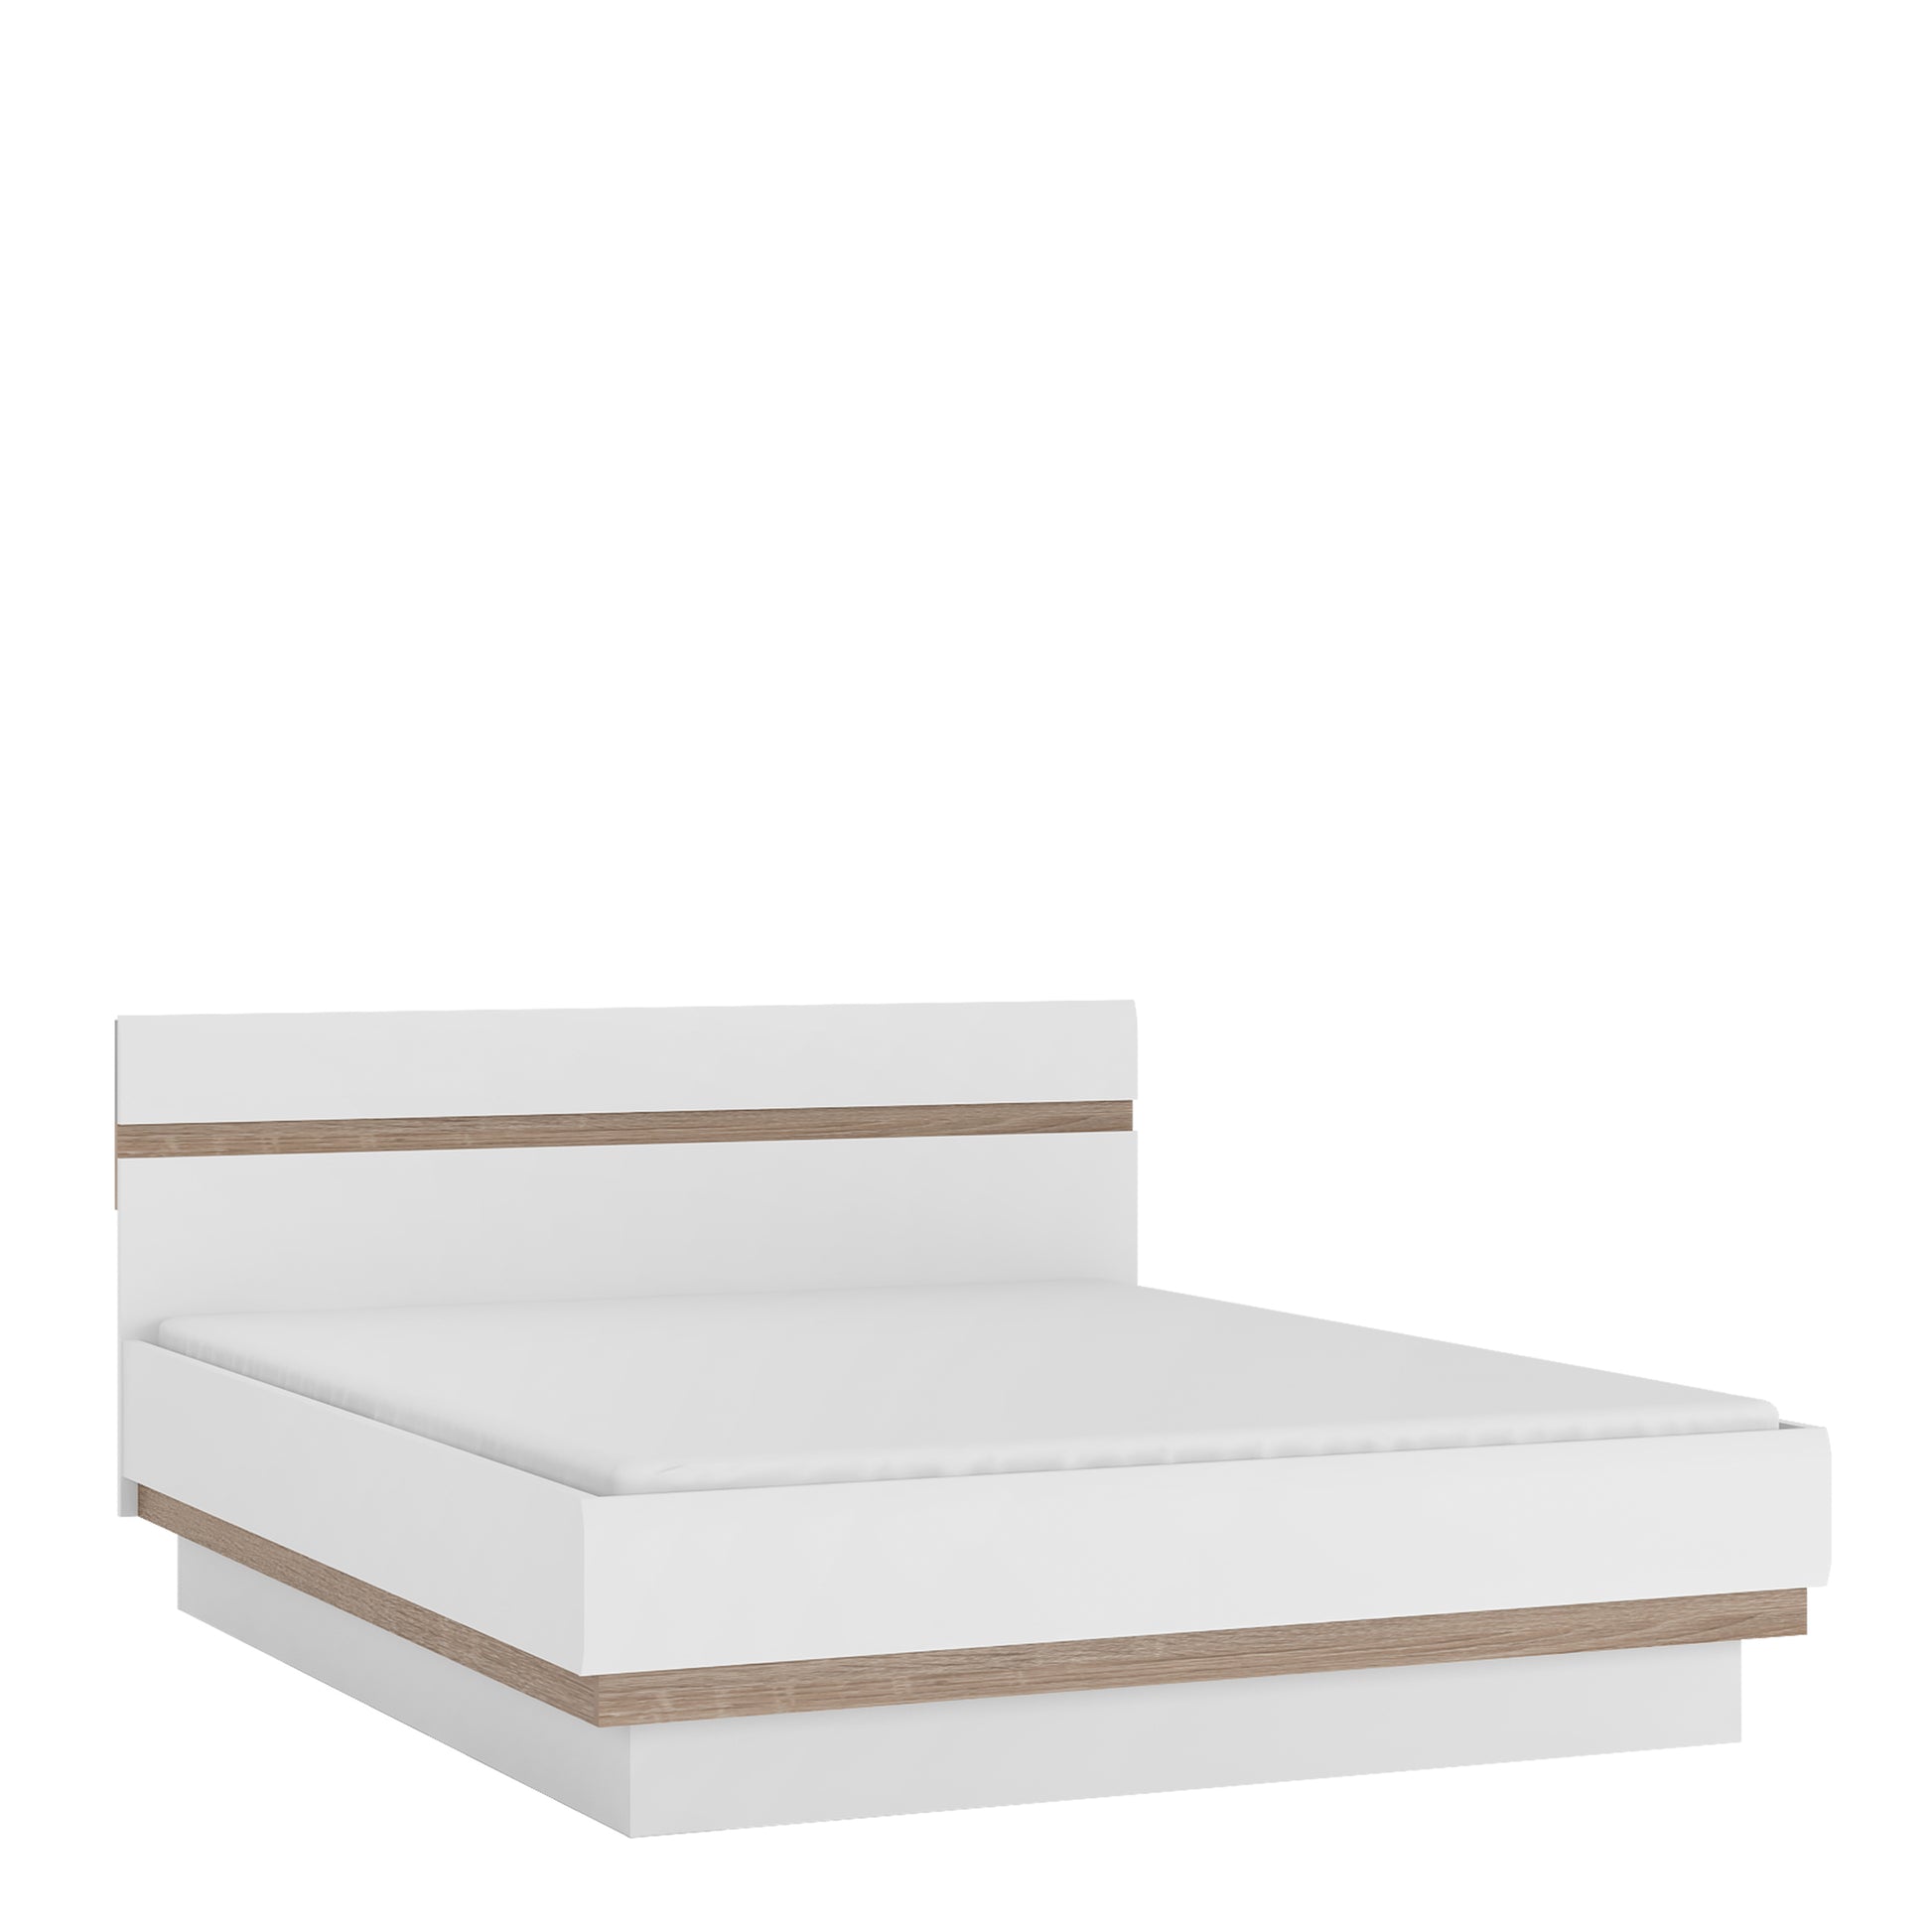 Chelsea  166cm wide King Size Bed frame in White with Oak Trim